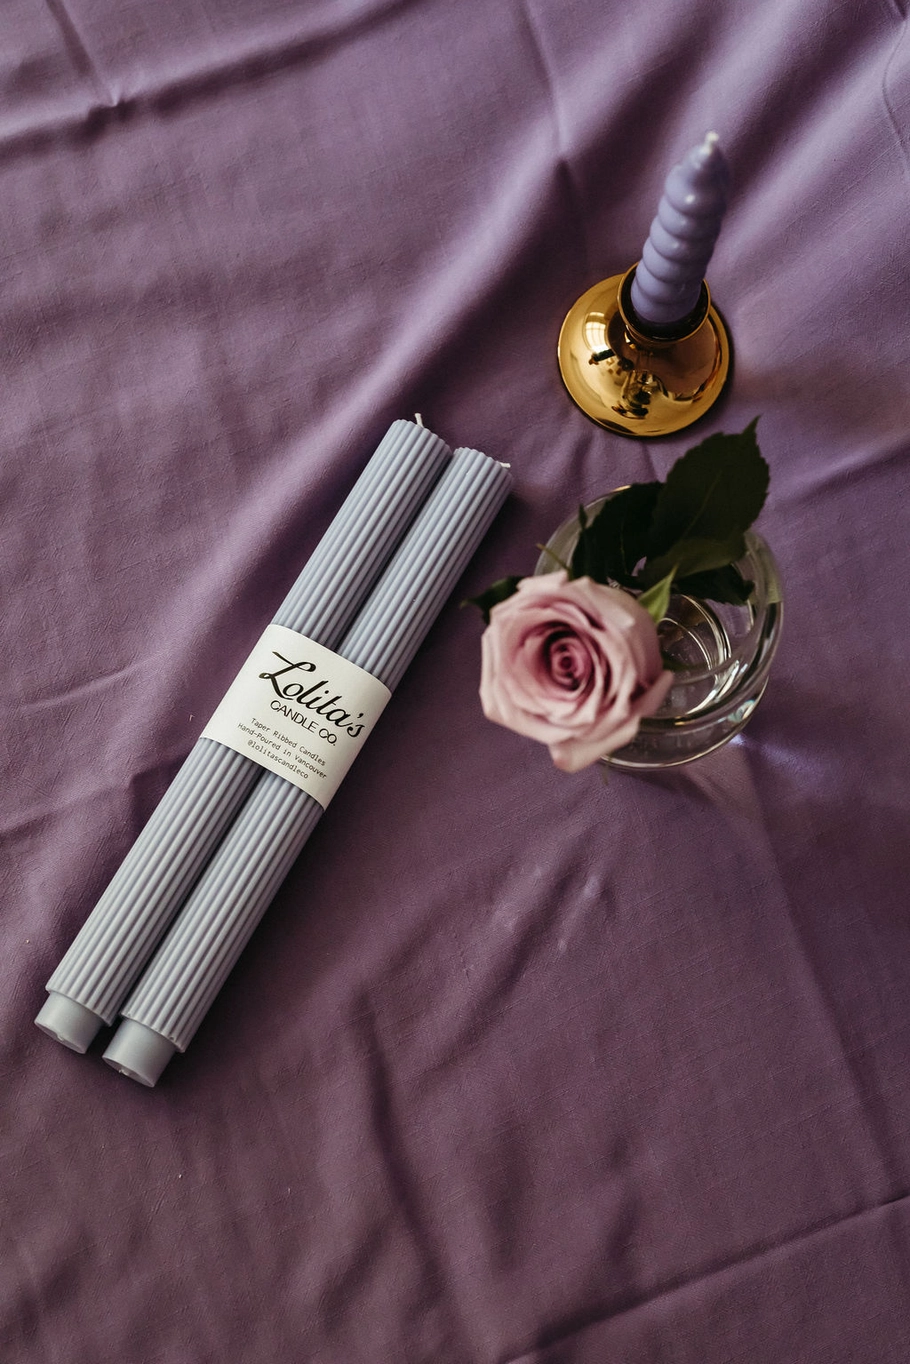 Ribbed Taper Candles - Lilac